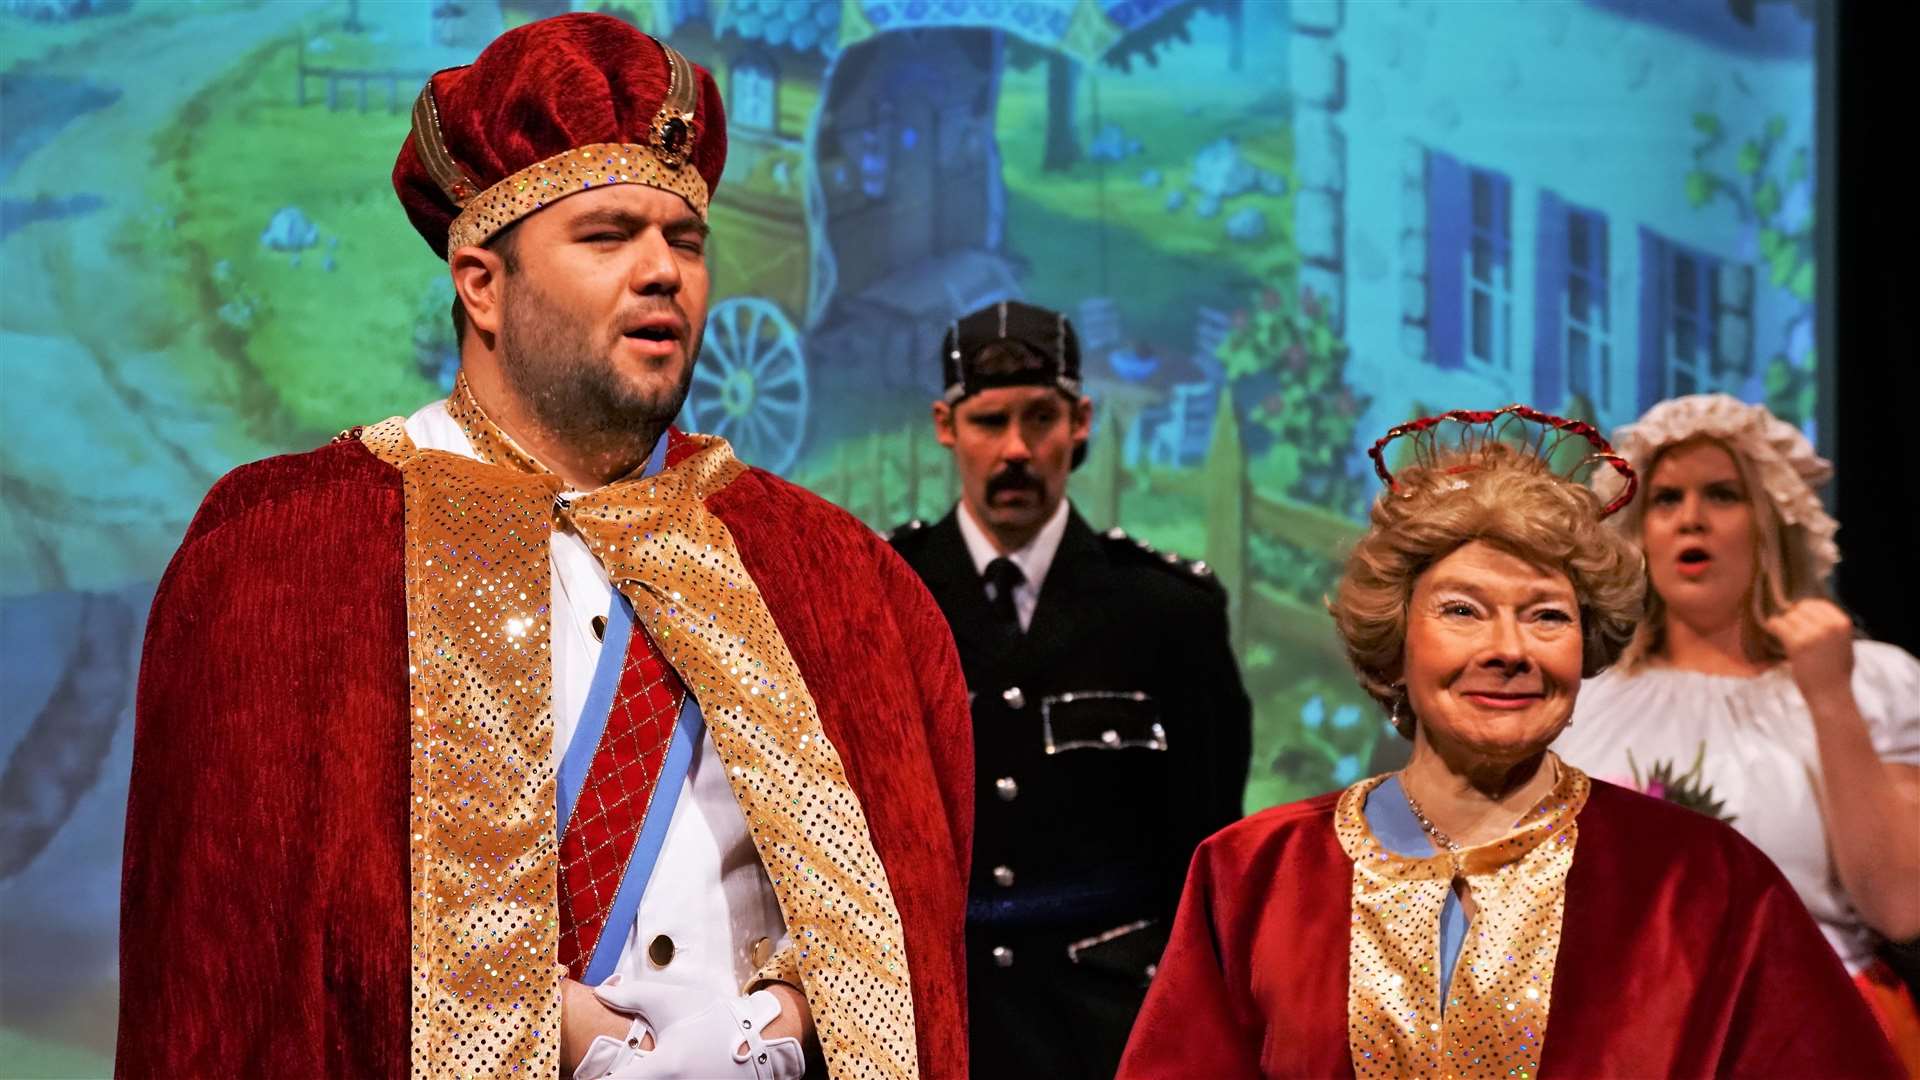 King Harold and Queen Cora are played by Joel Hook and Julie Kedward. Picture: DGS